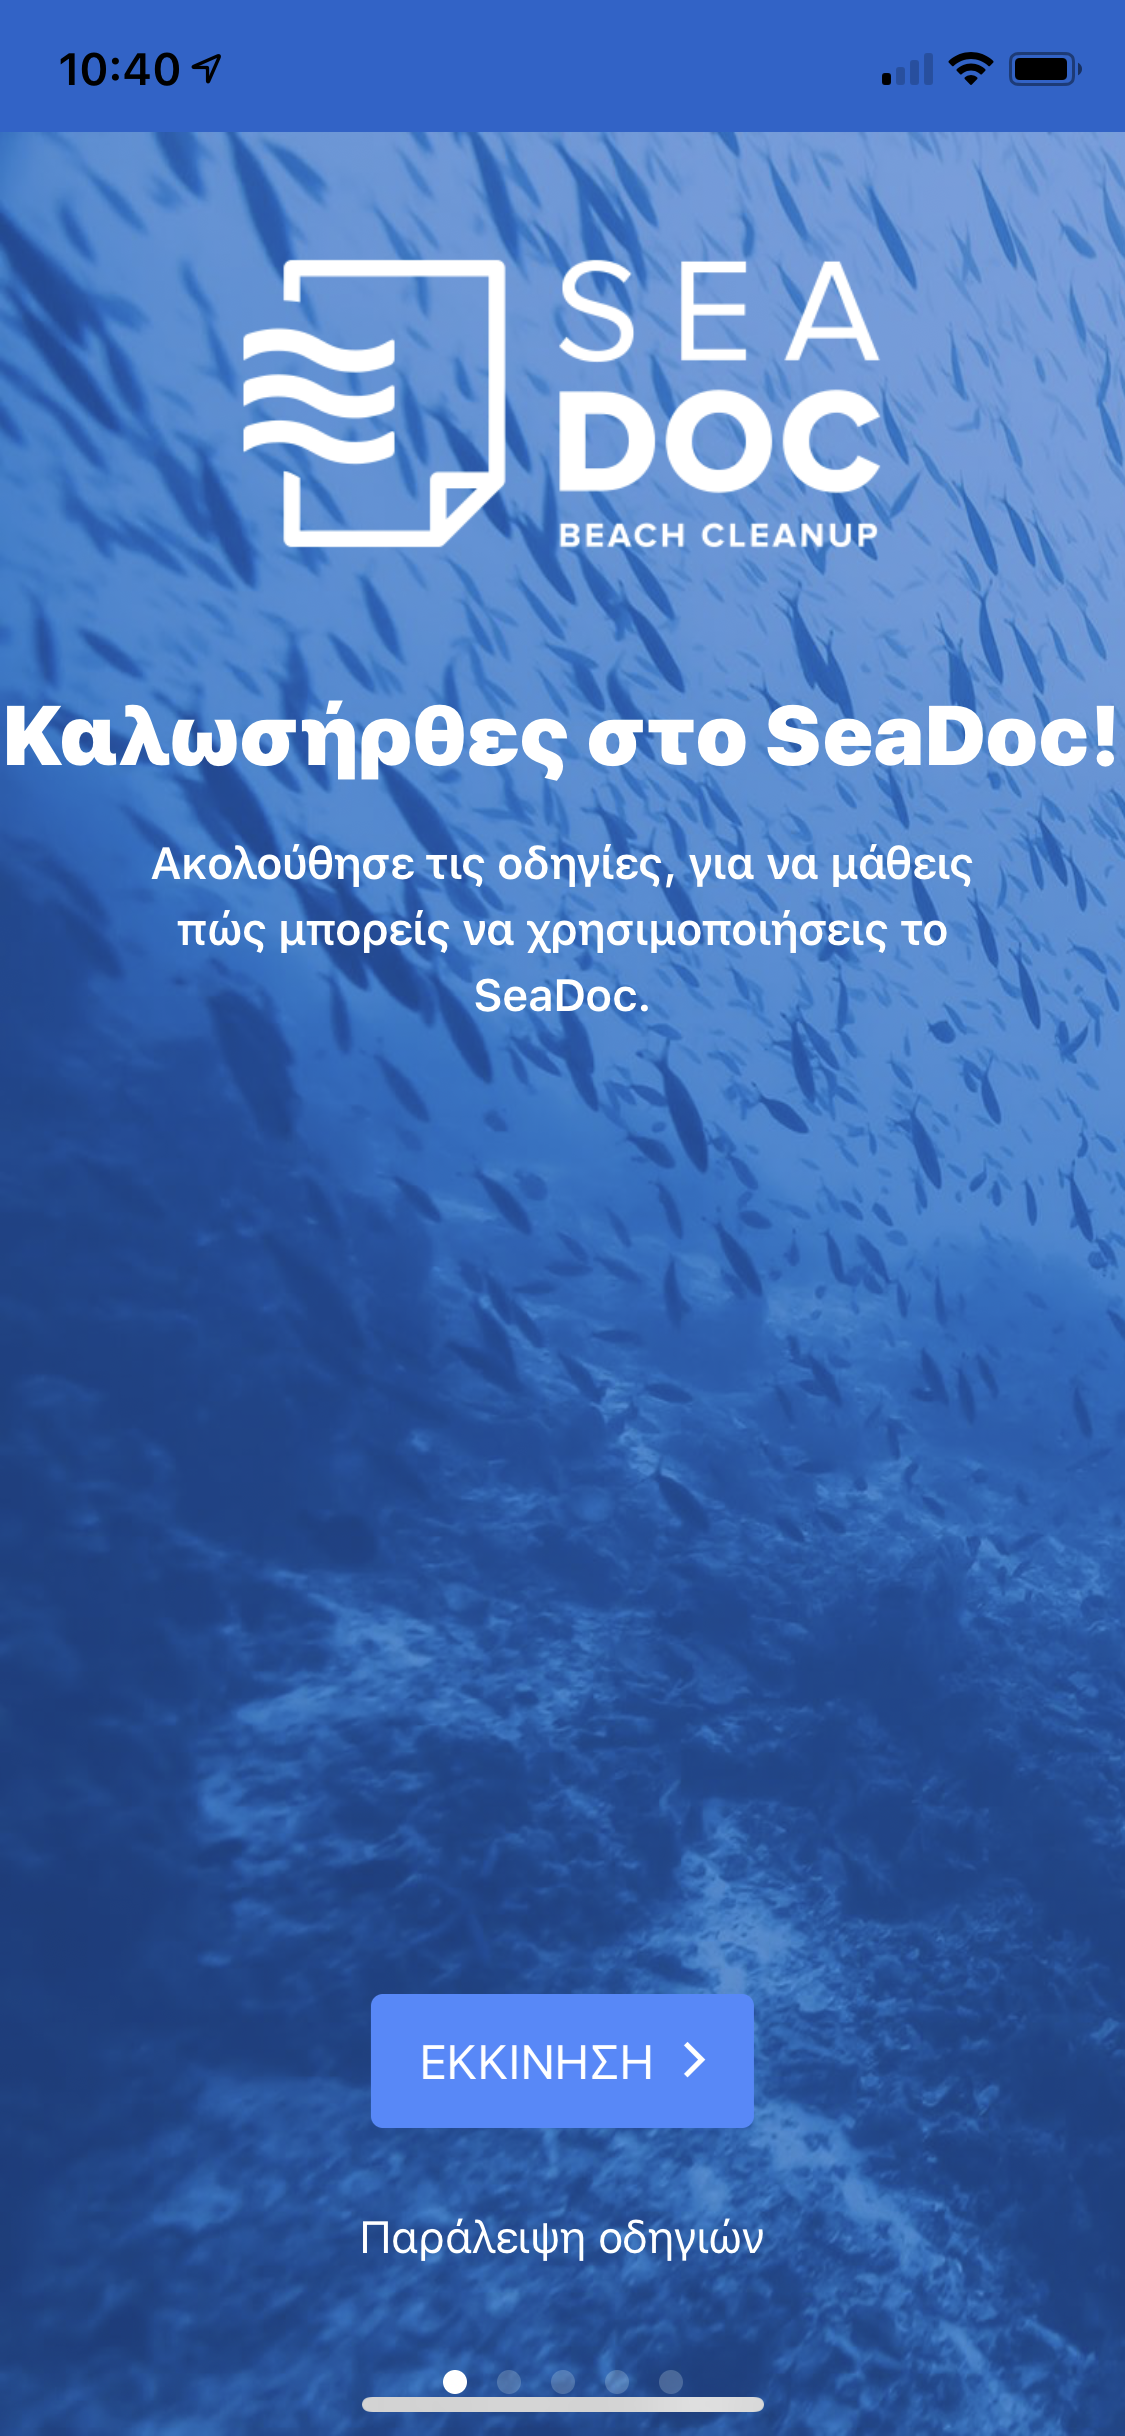 SEA-DOC_FRONT.png?mtime=20190712151352#asset:133170